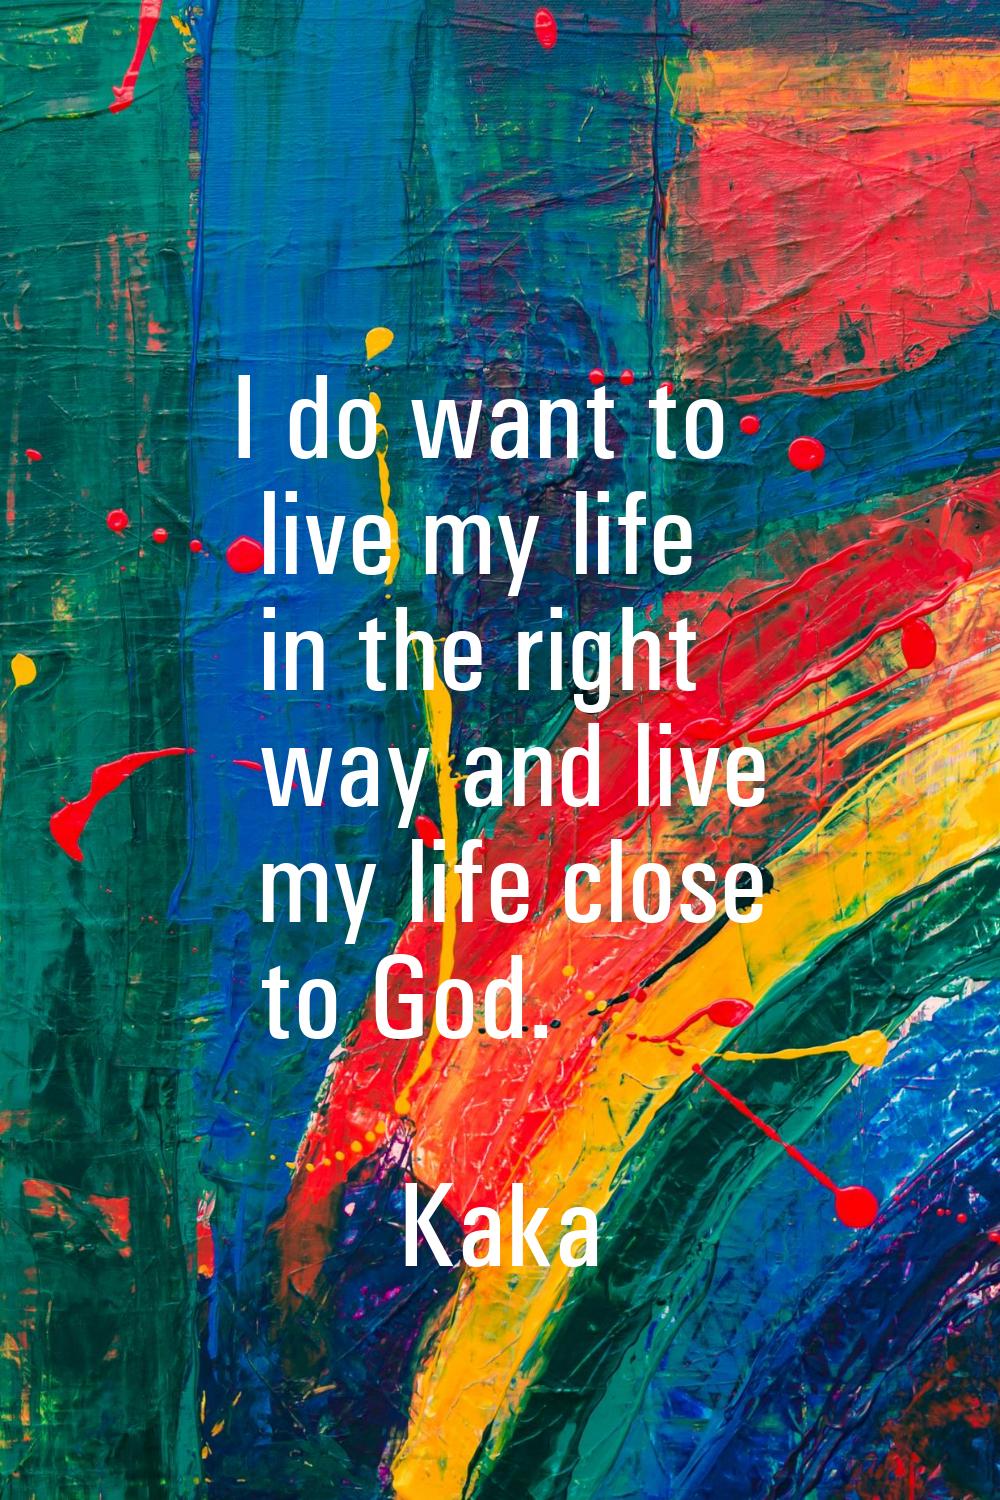 I do want to live my life in the right way and live my life close to God.